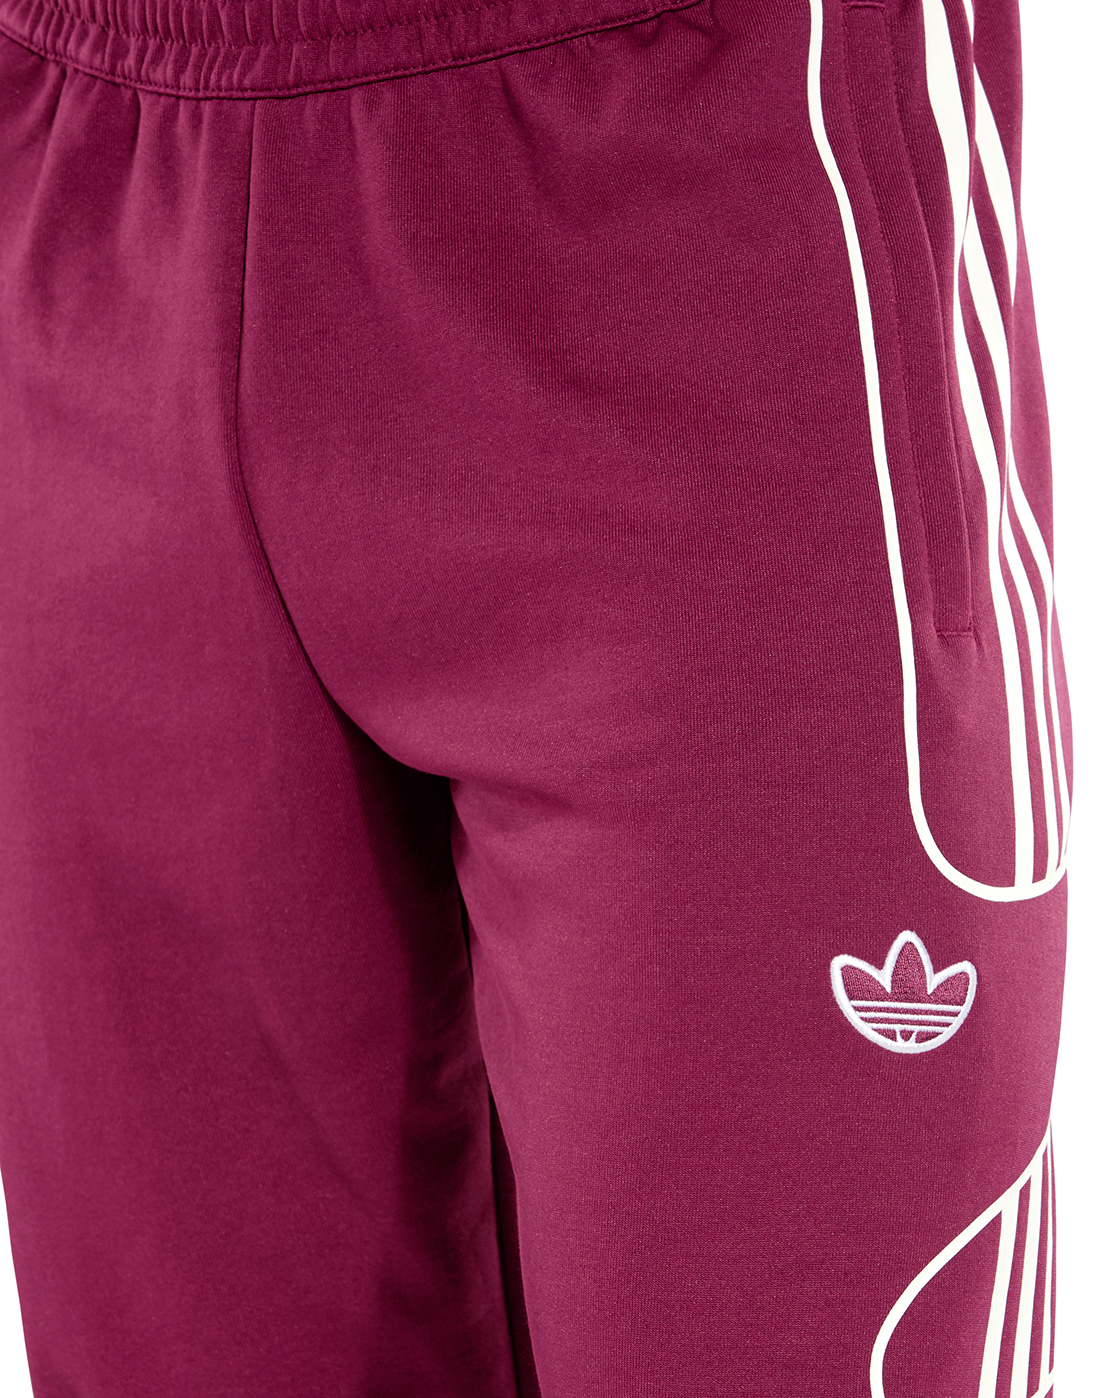 adidas Originals Mens Flamestrike Joggers - Red | Life Style Sports IE